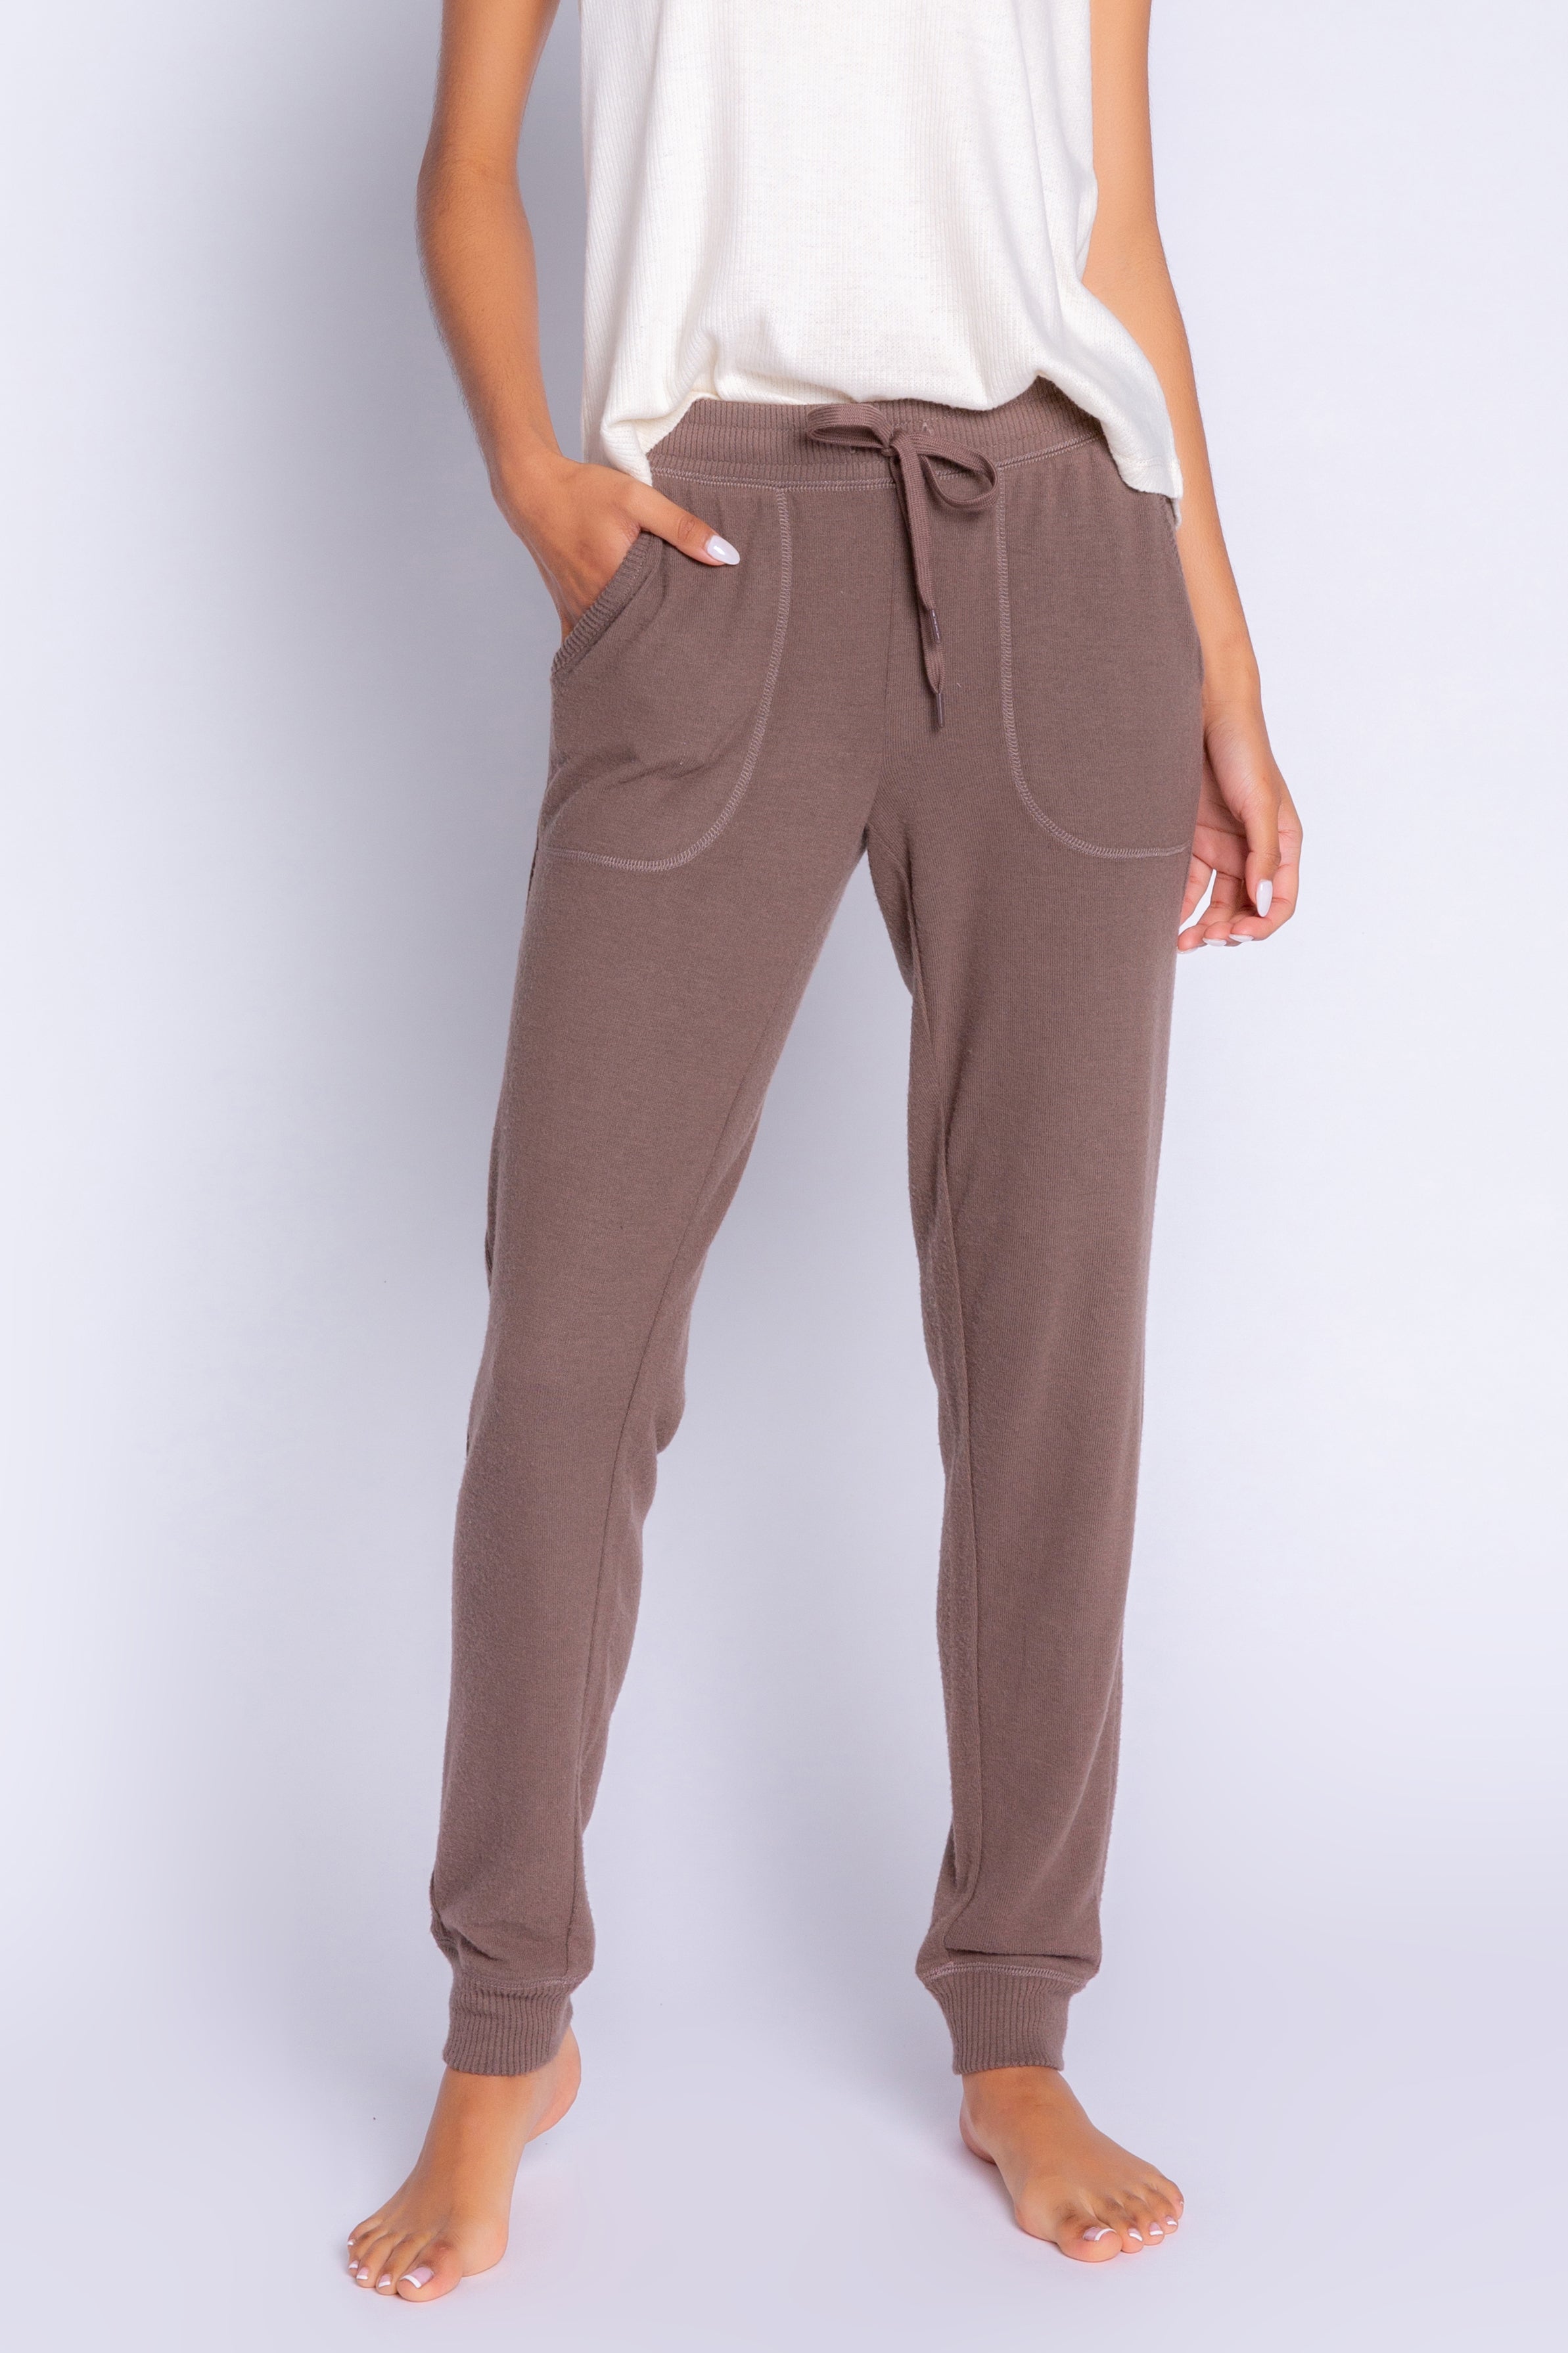 Peachy Pant in Cocoa